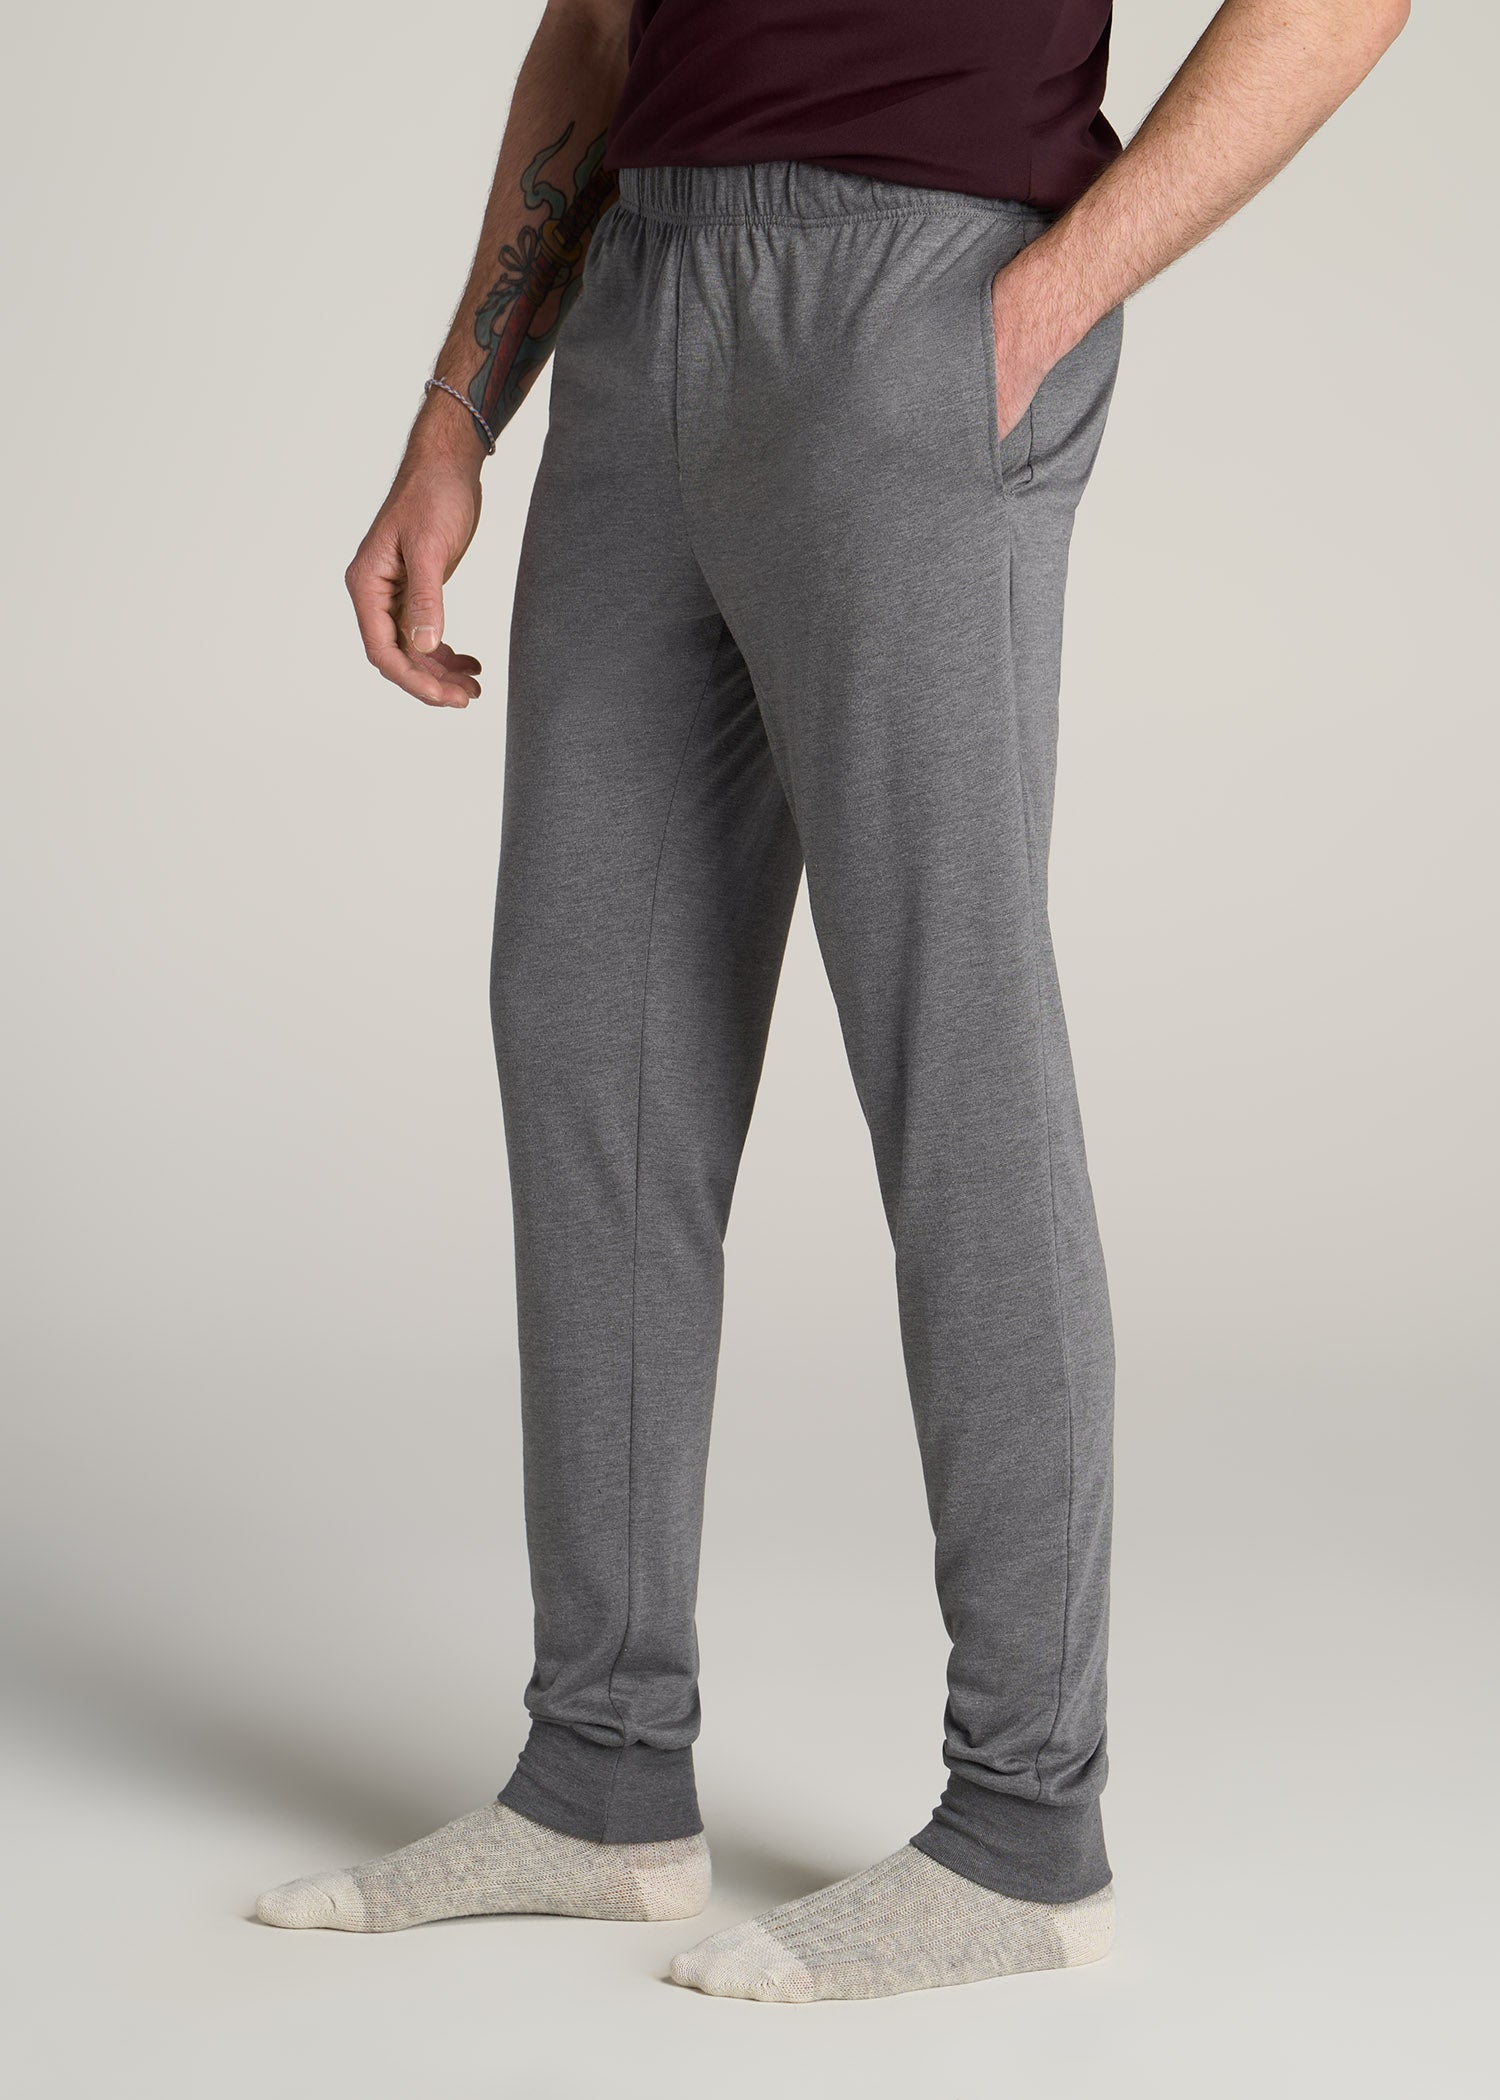 American-Tall-Men-Lounge-Pant-Joggers-Charcoal-side